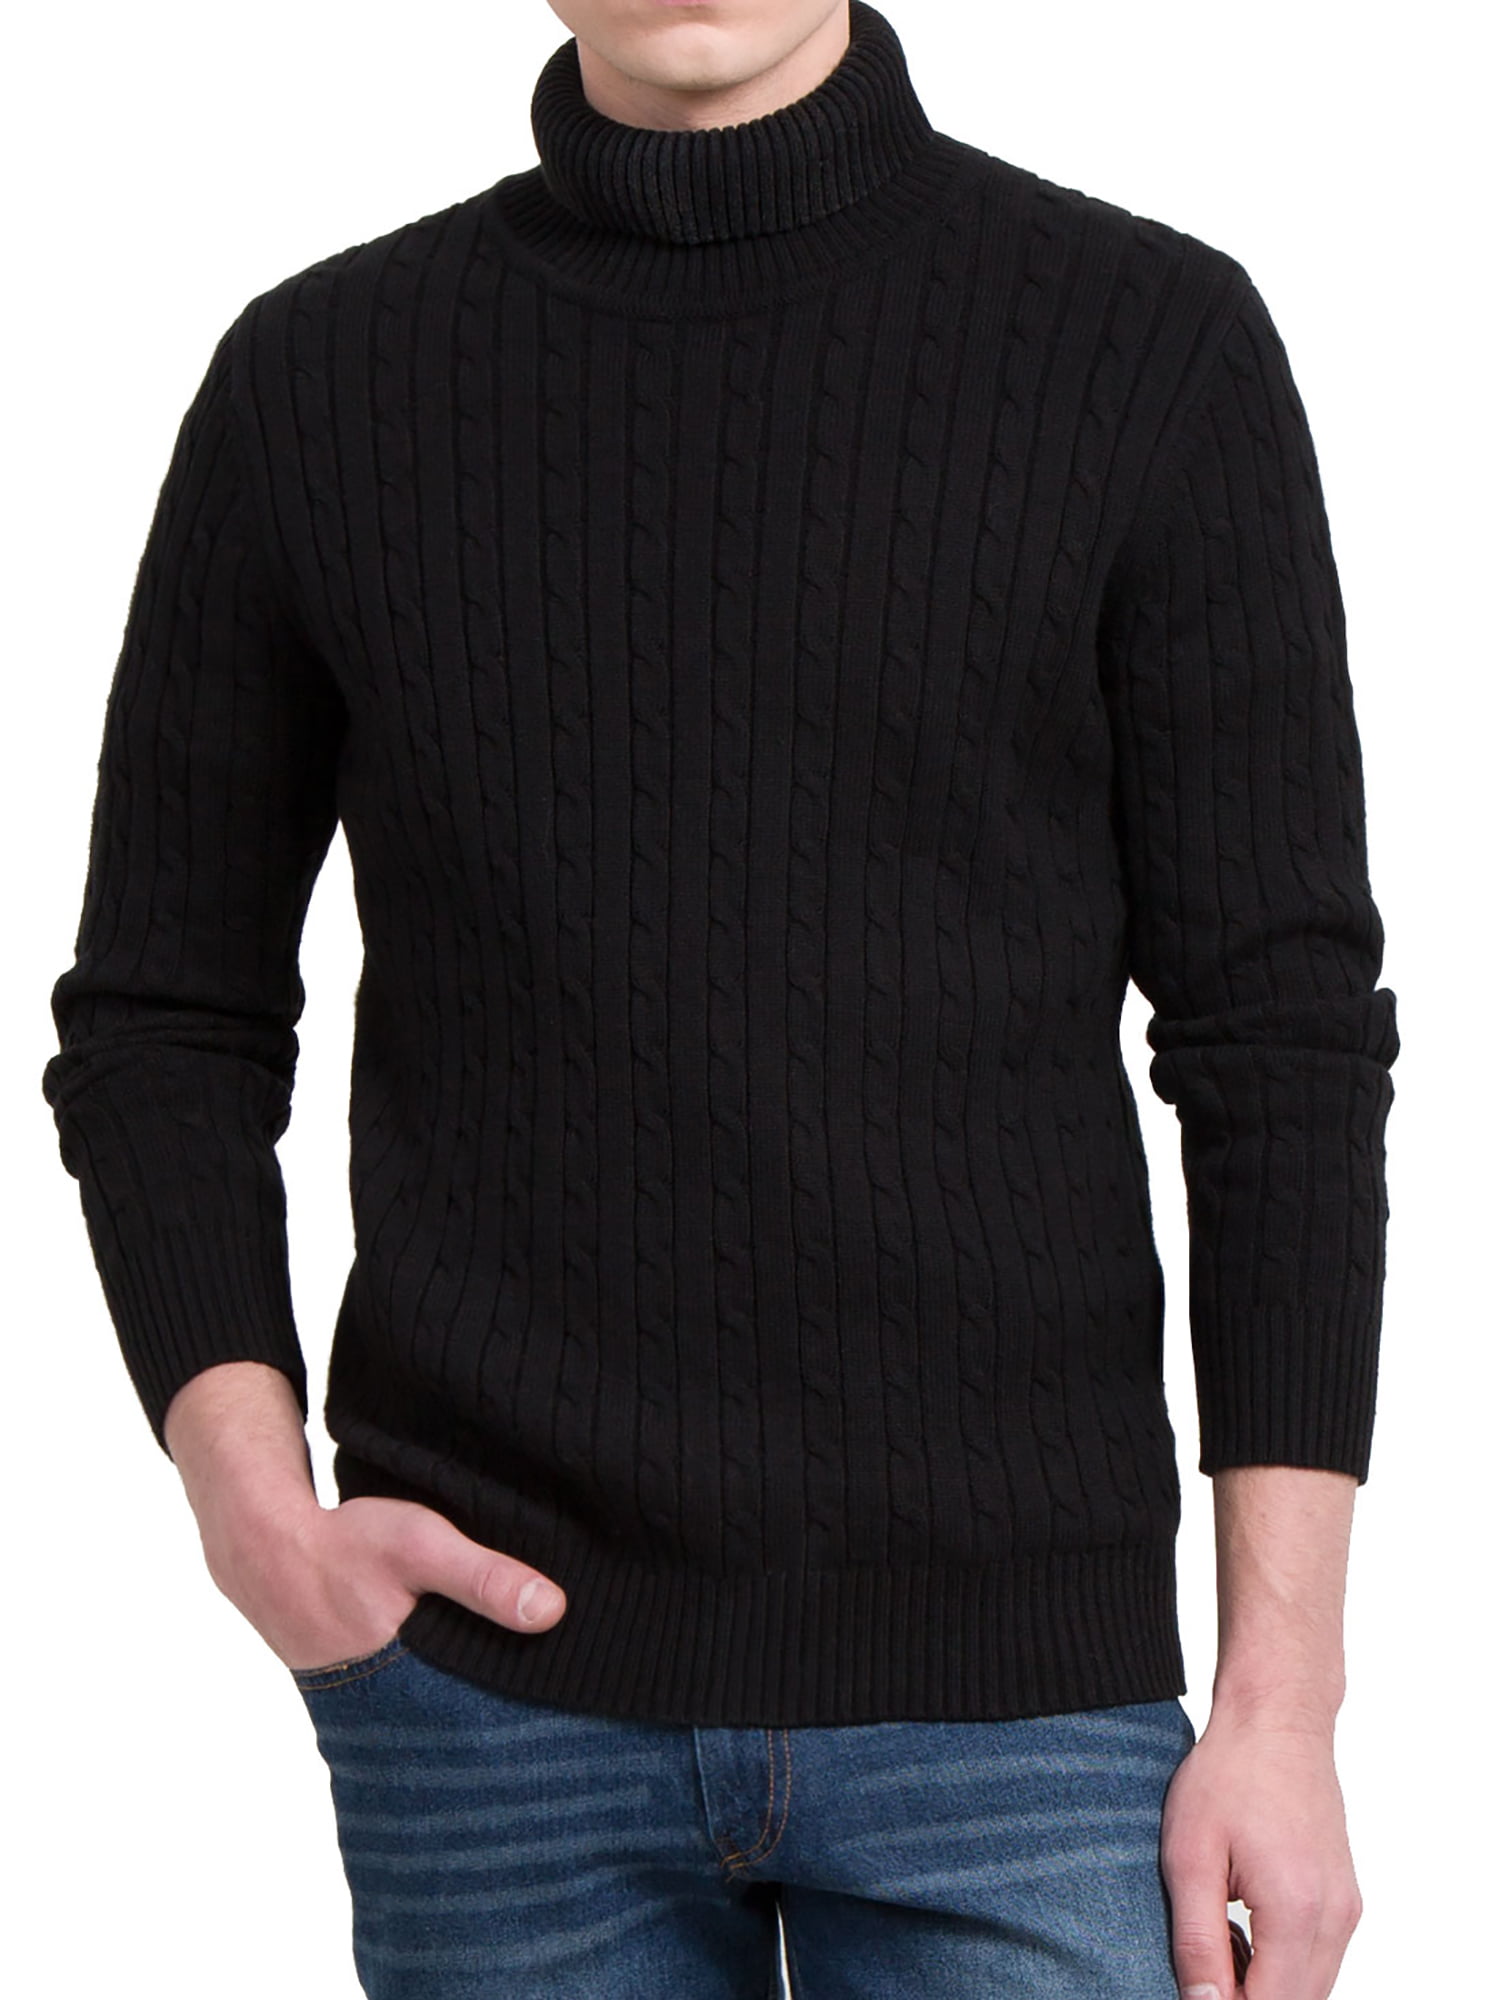 Men Turtle-neck Long Sleeves Cable Knitted Sweater Black XL | Walmart ...